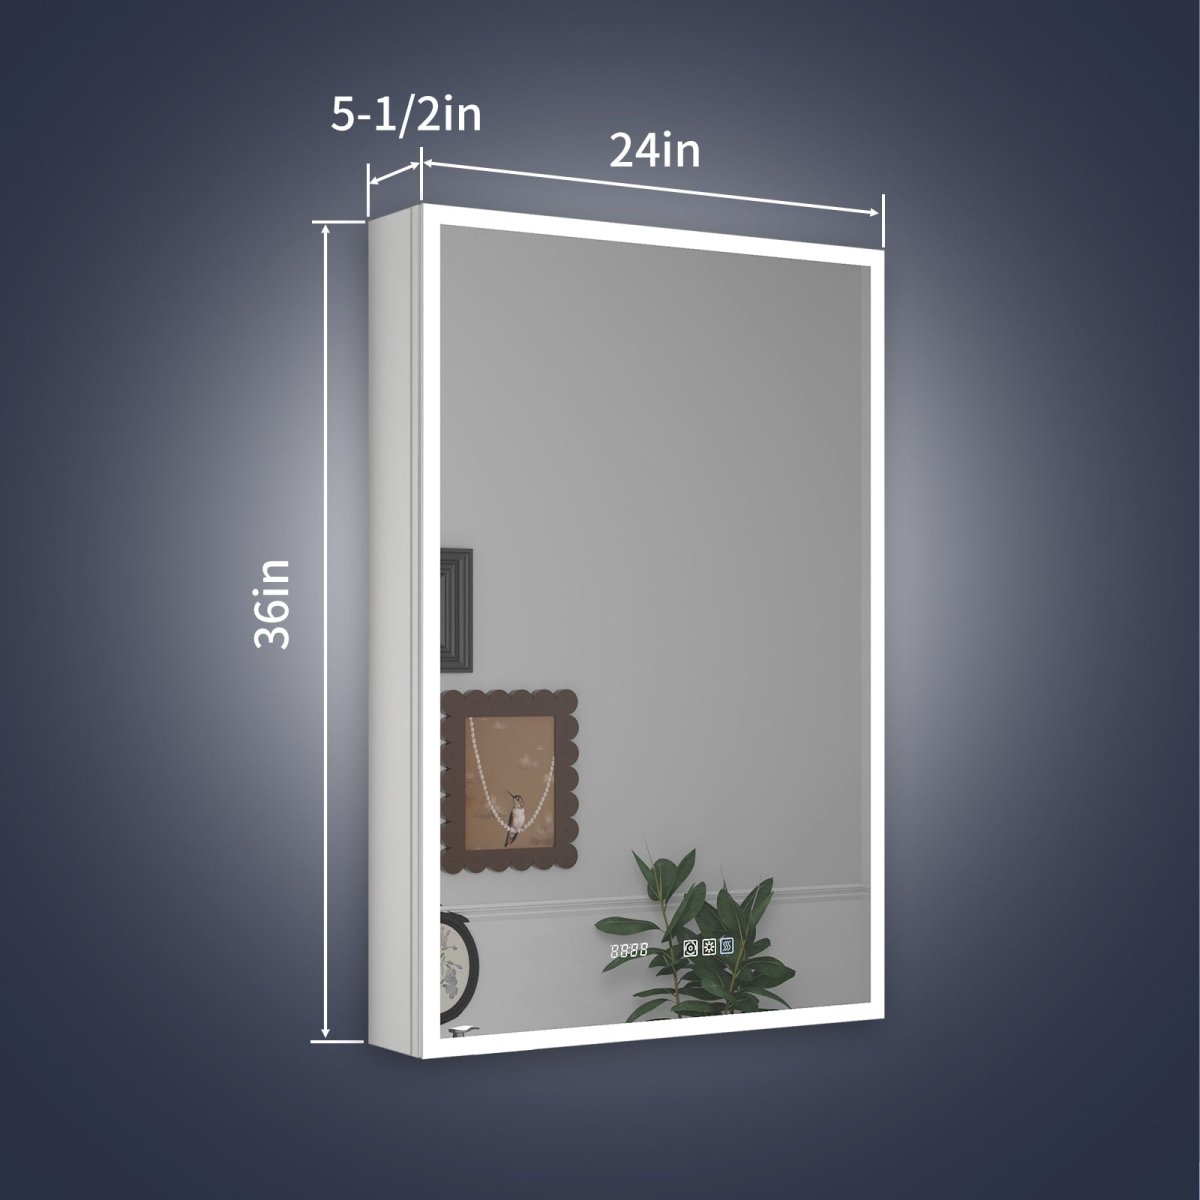 Rim 24" W x 36" H Led Lighted Medicine Cabinet Recessed or Surface with Mirrors, Hinge On The Left